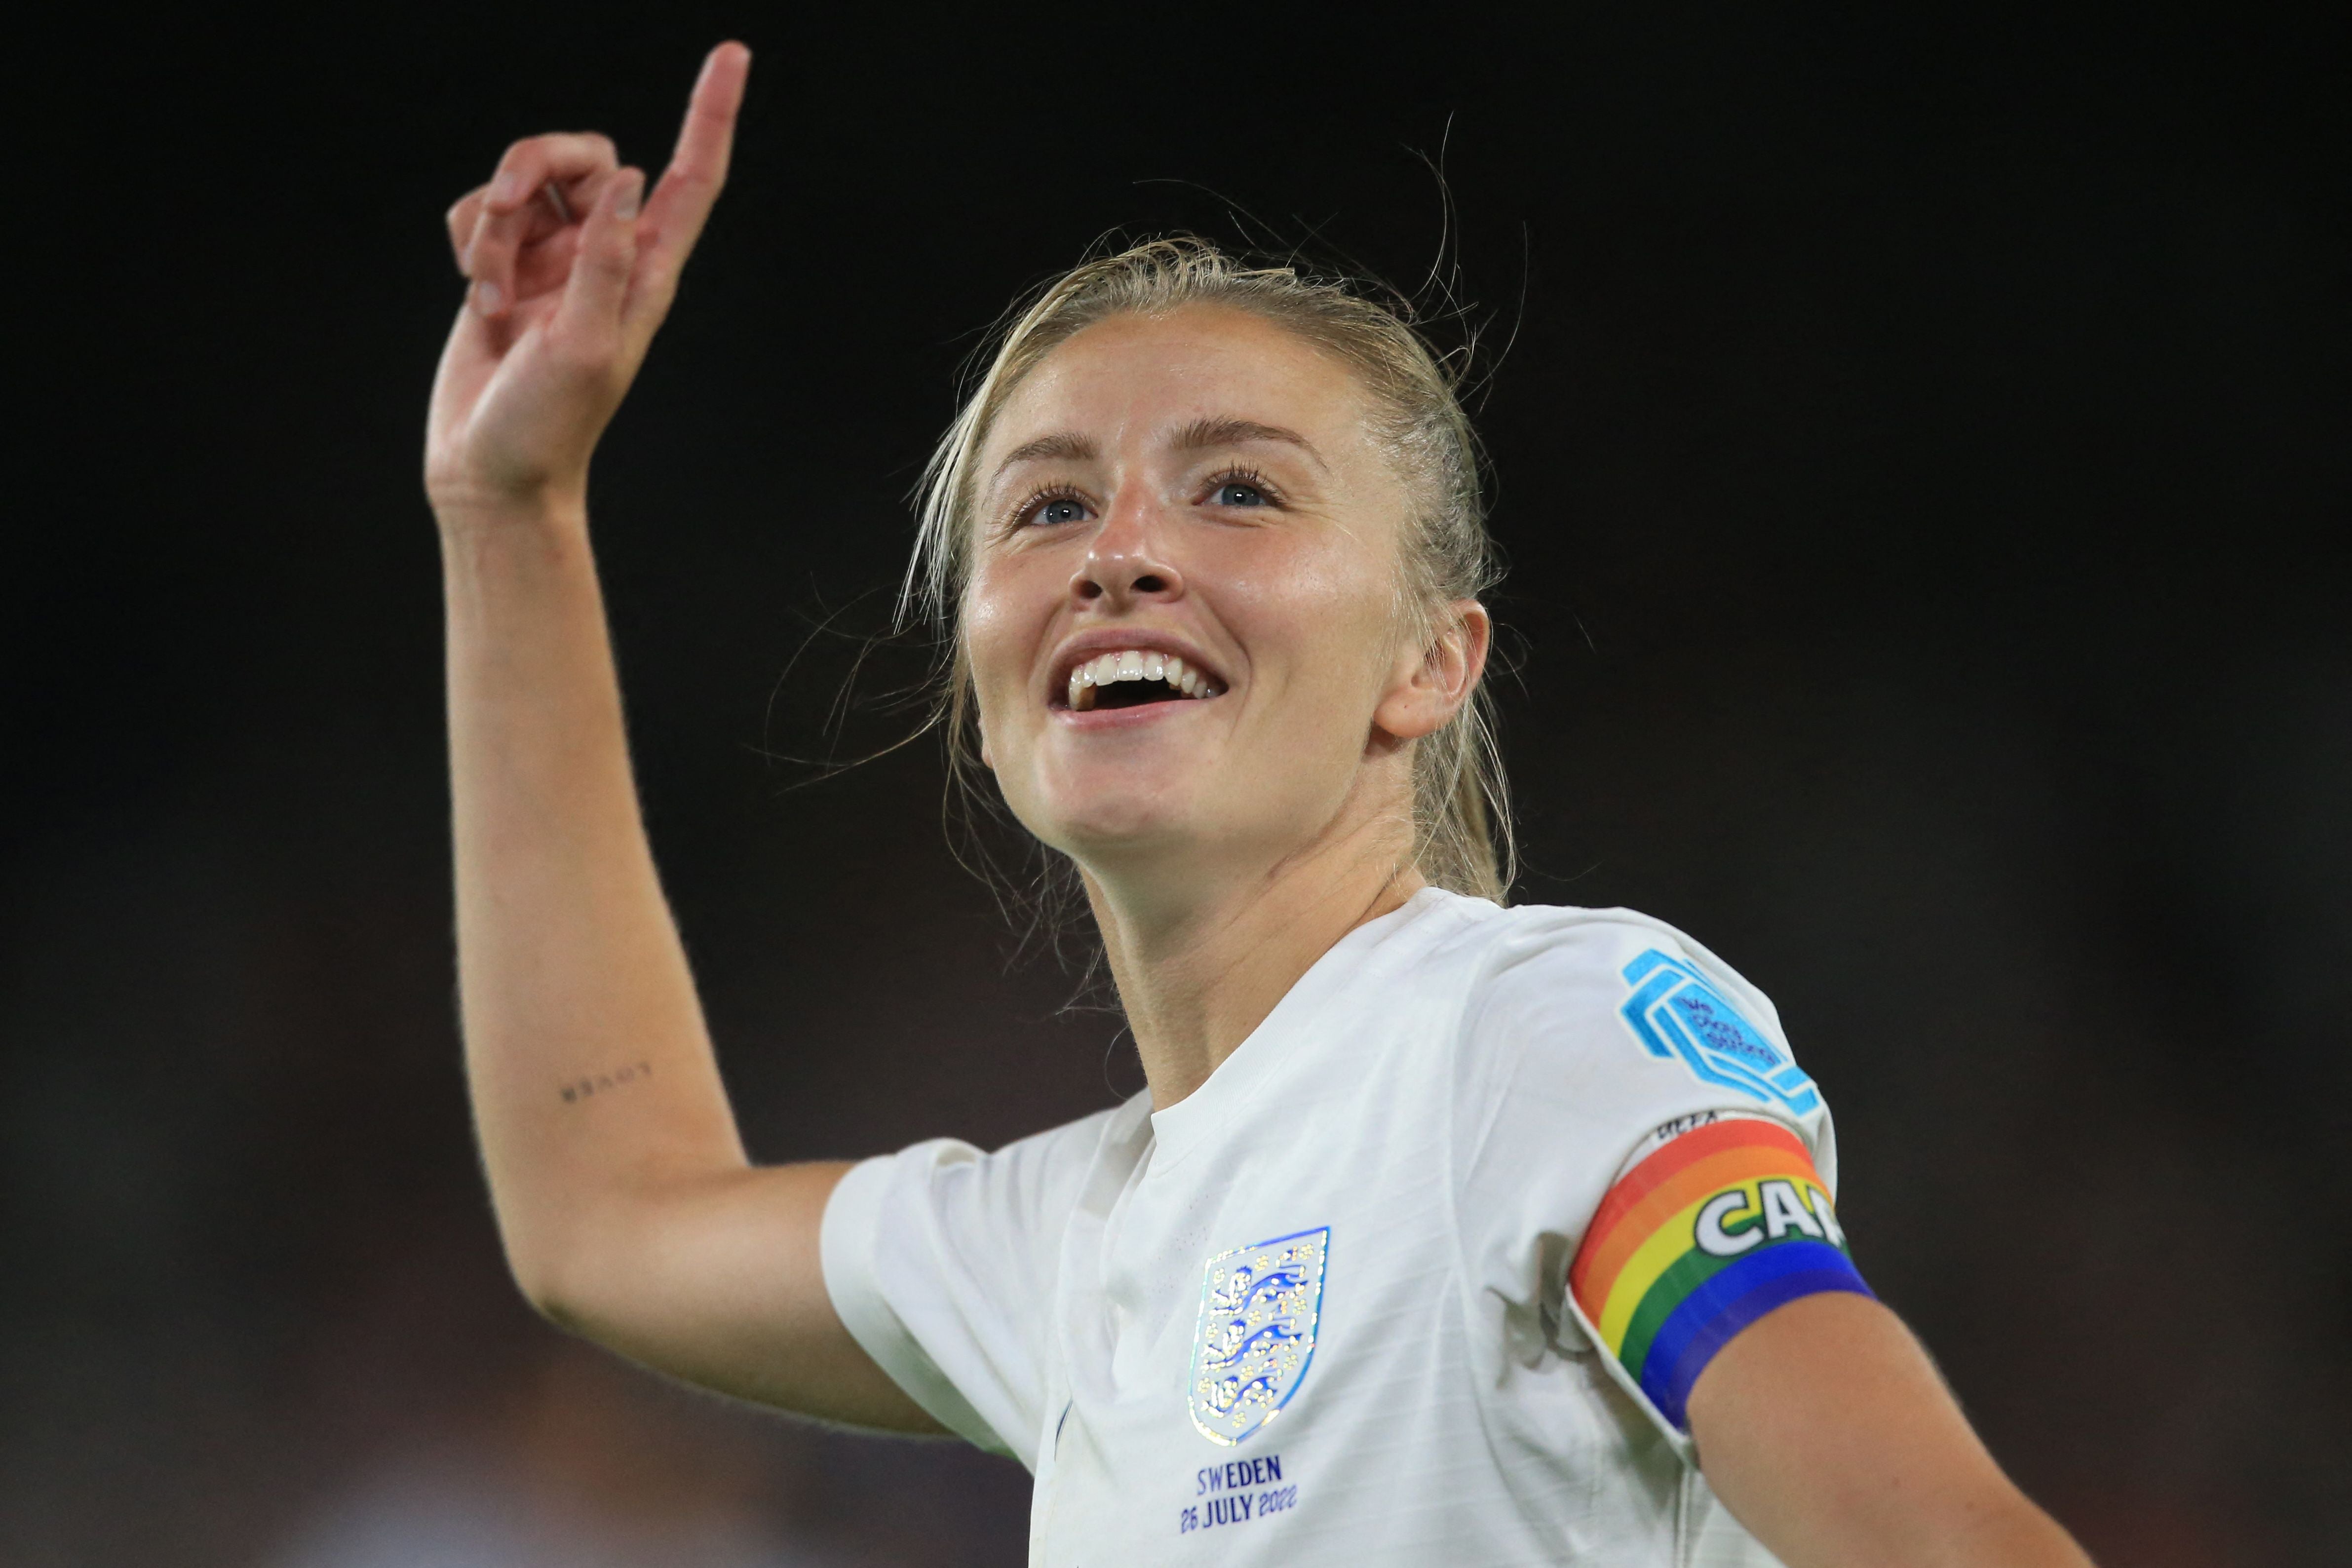 England's midfielder Leah Williamson celebrates after winning with her team at the end of the UEFA Women's Euro 2022 semi-final football match between England and Sweden